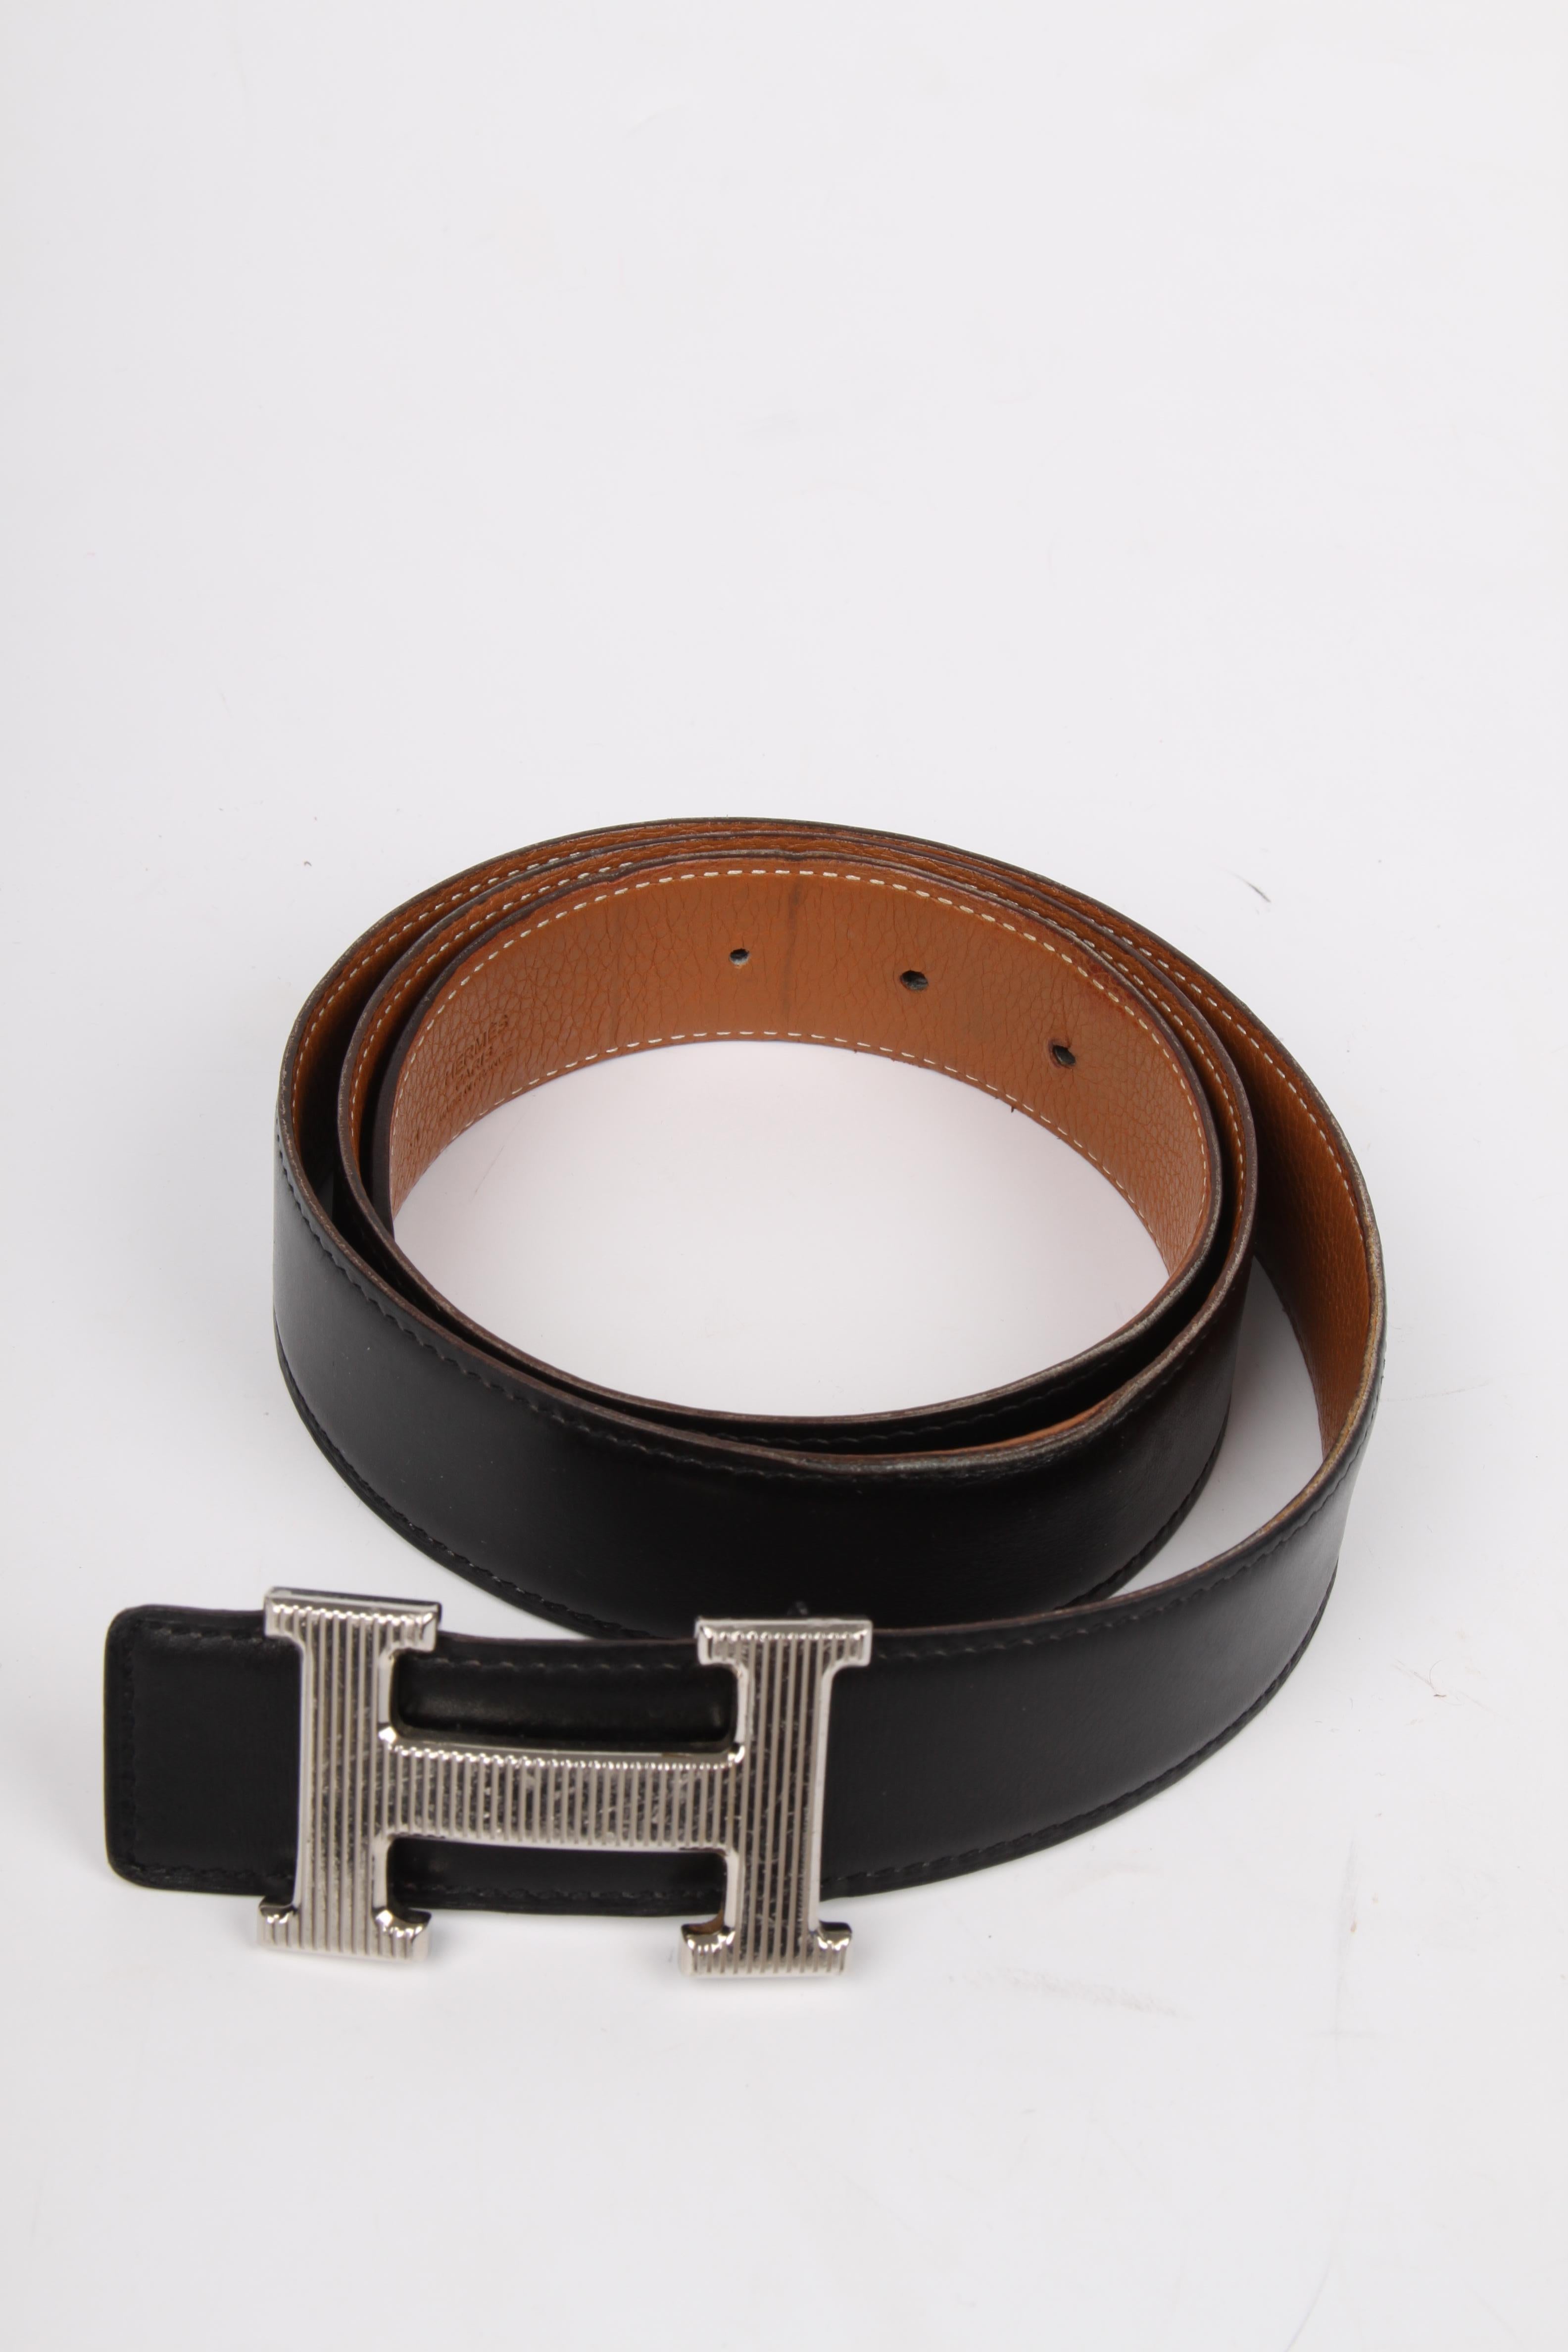 The welknown 'H' belt by Hermès, this one is reversible!

One side is crafted from black leather, the other side is brown. Length of the belt is 95 centimeters, 3 centimeters wide, embossed with stamp L. The silver-tone H buckle has vertical stripes